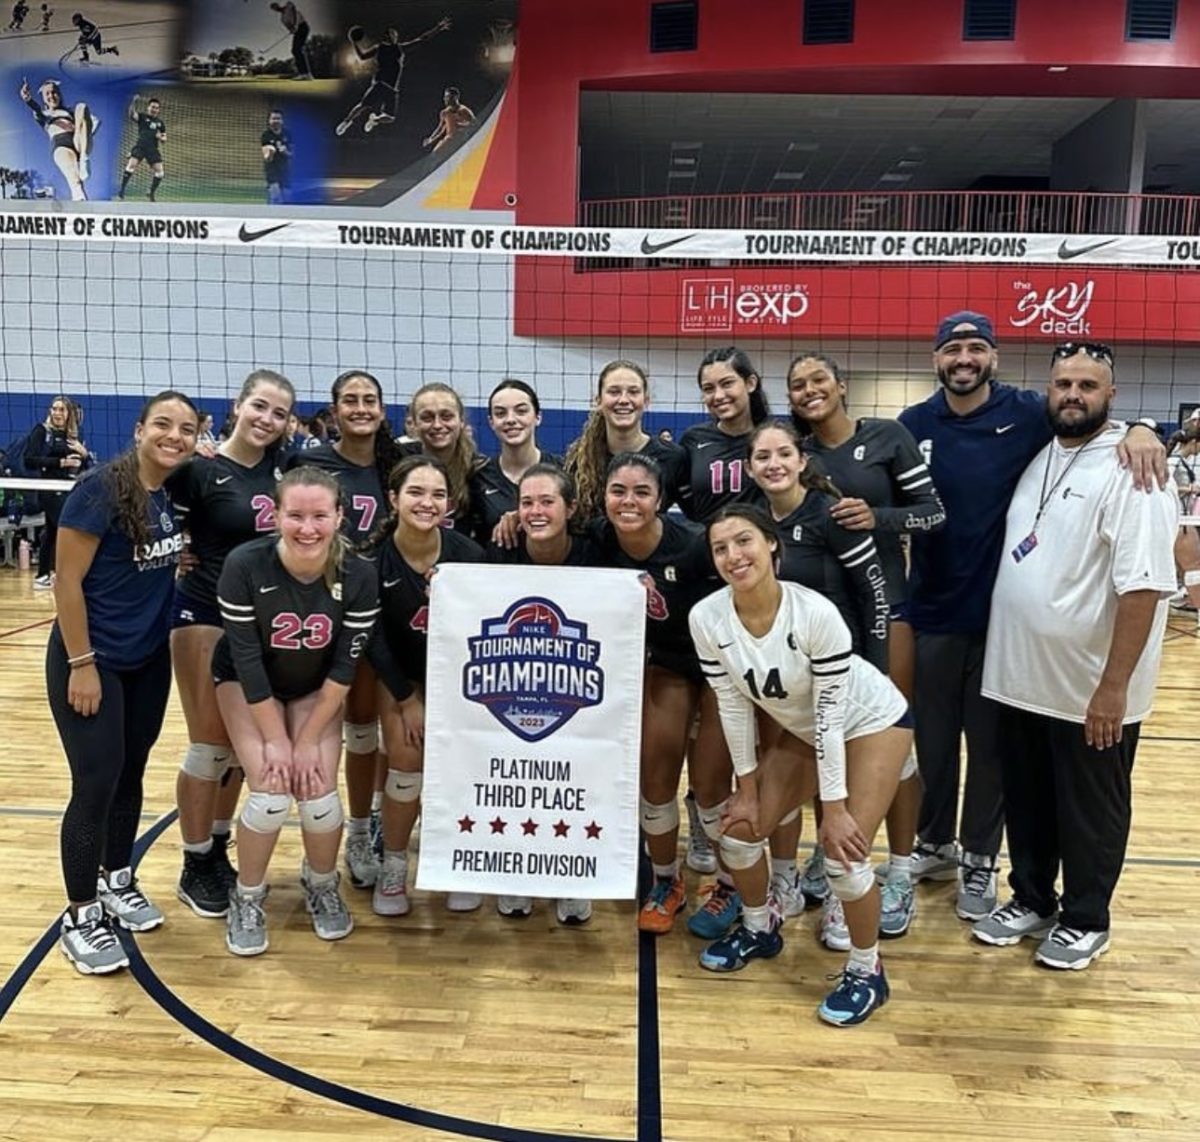 Girls+Varsity+Volleyball+celebrating+after+placing+3rd+in+the+Nike+Tournament+of+Champions+Premier+Division.+The+group+only+lost+once+throughout+the+tournament+and+solidified+themselves+as+a+top+highschool+team+in+the+nation.+Photo+provided+by+%40gullivergirlsvolleyball